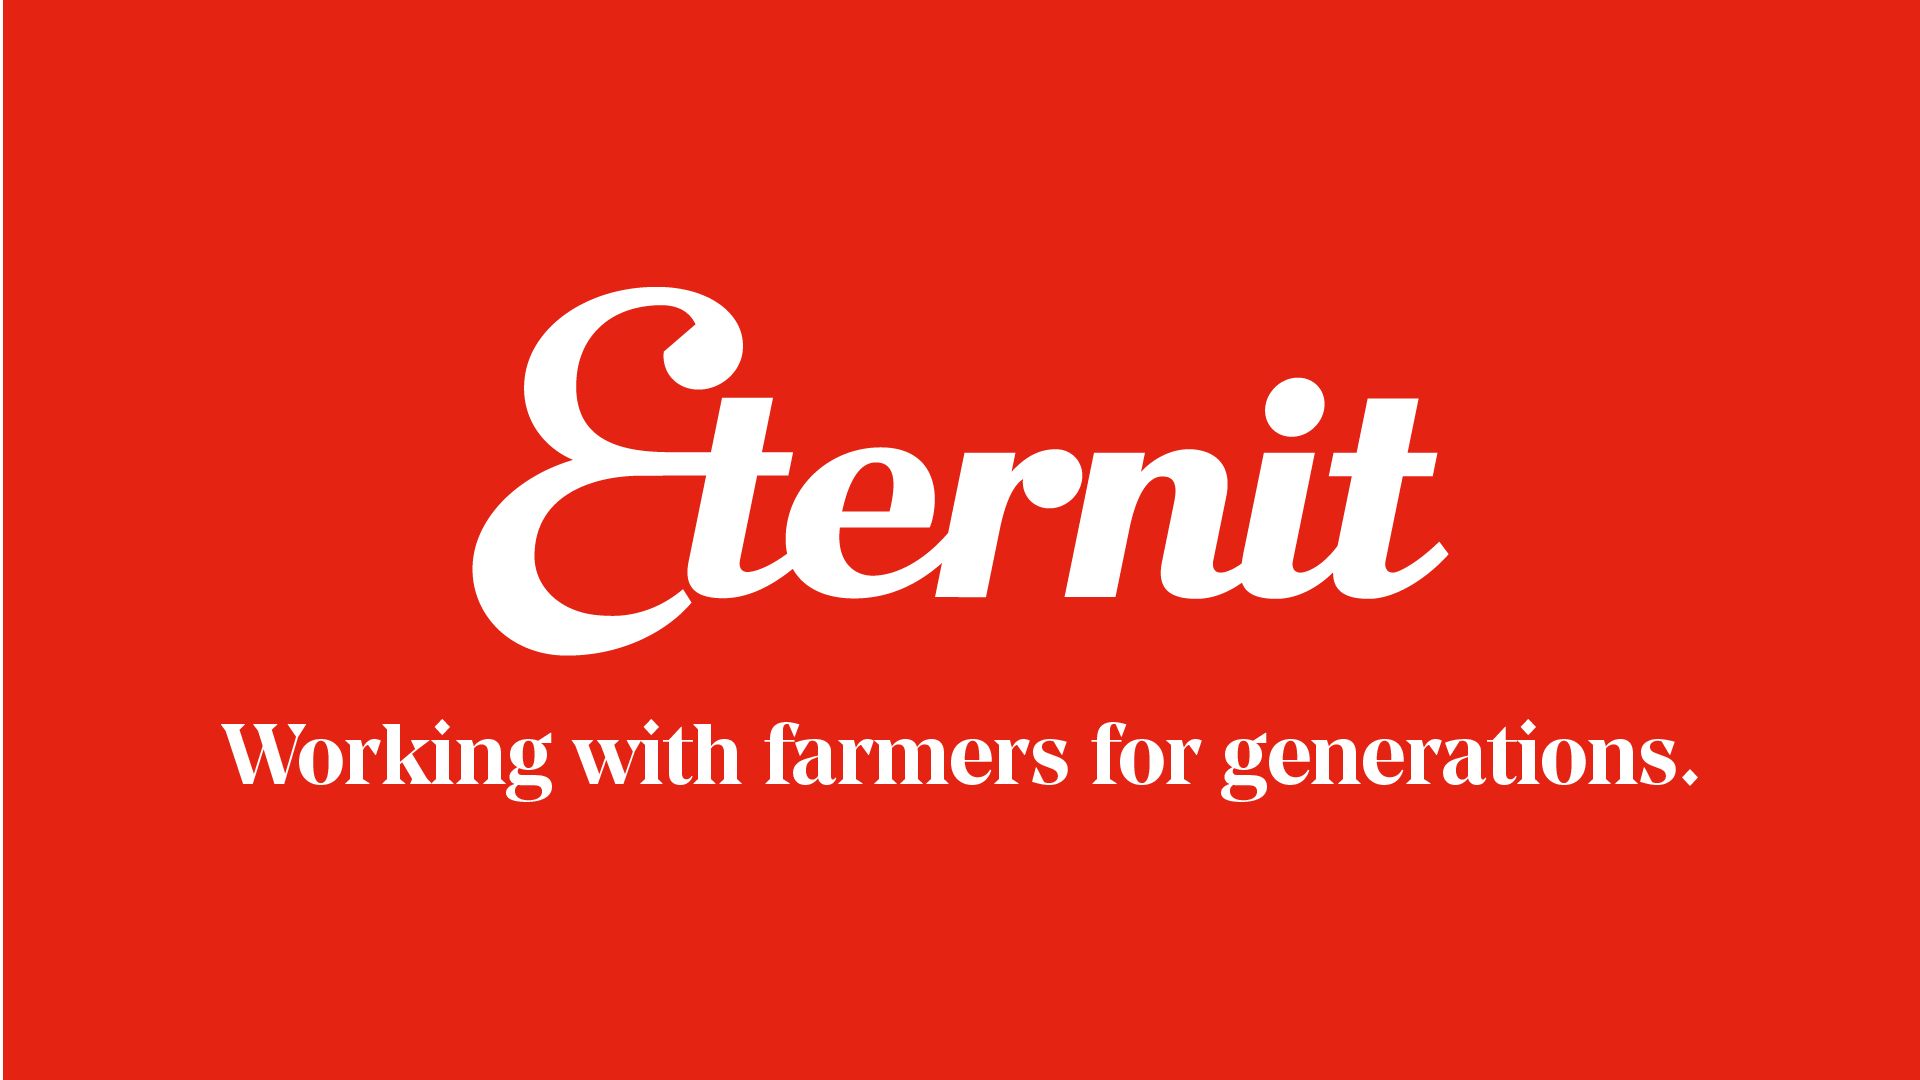 Working with farmers for generations